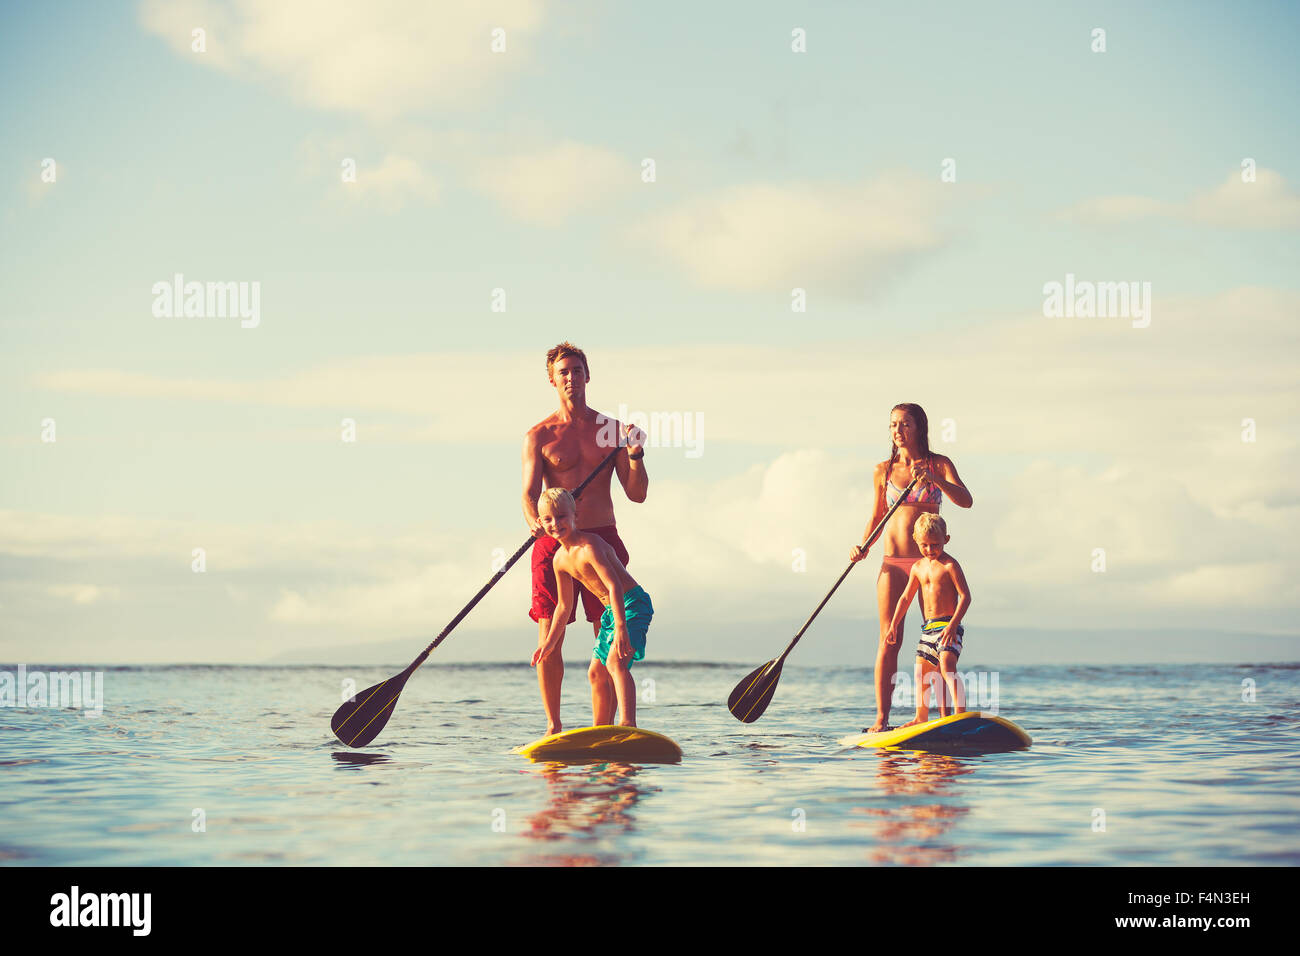 Family stand up paddling at sunrise, Summer fun outdoor lifestyle Stock Photo